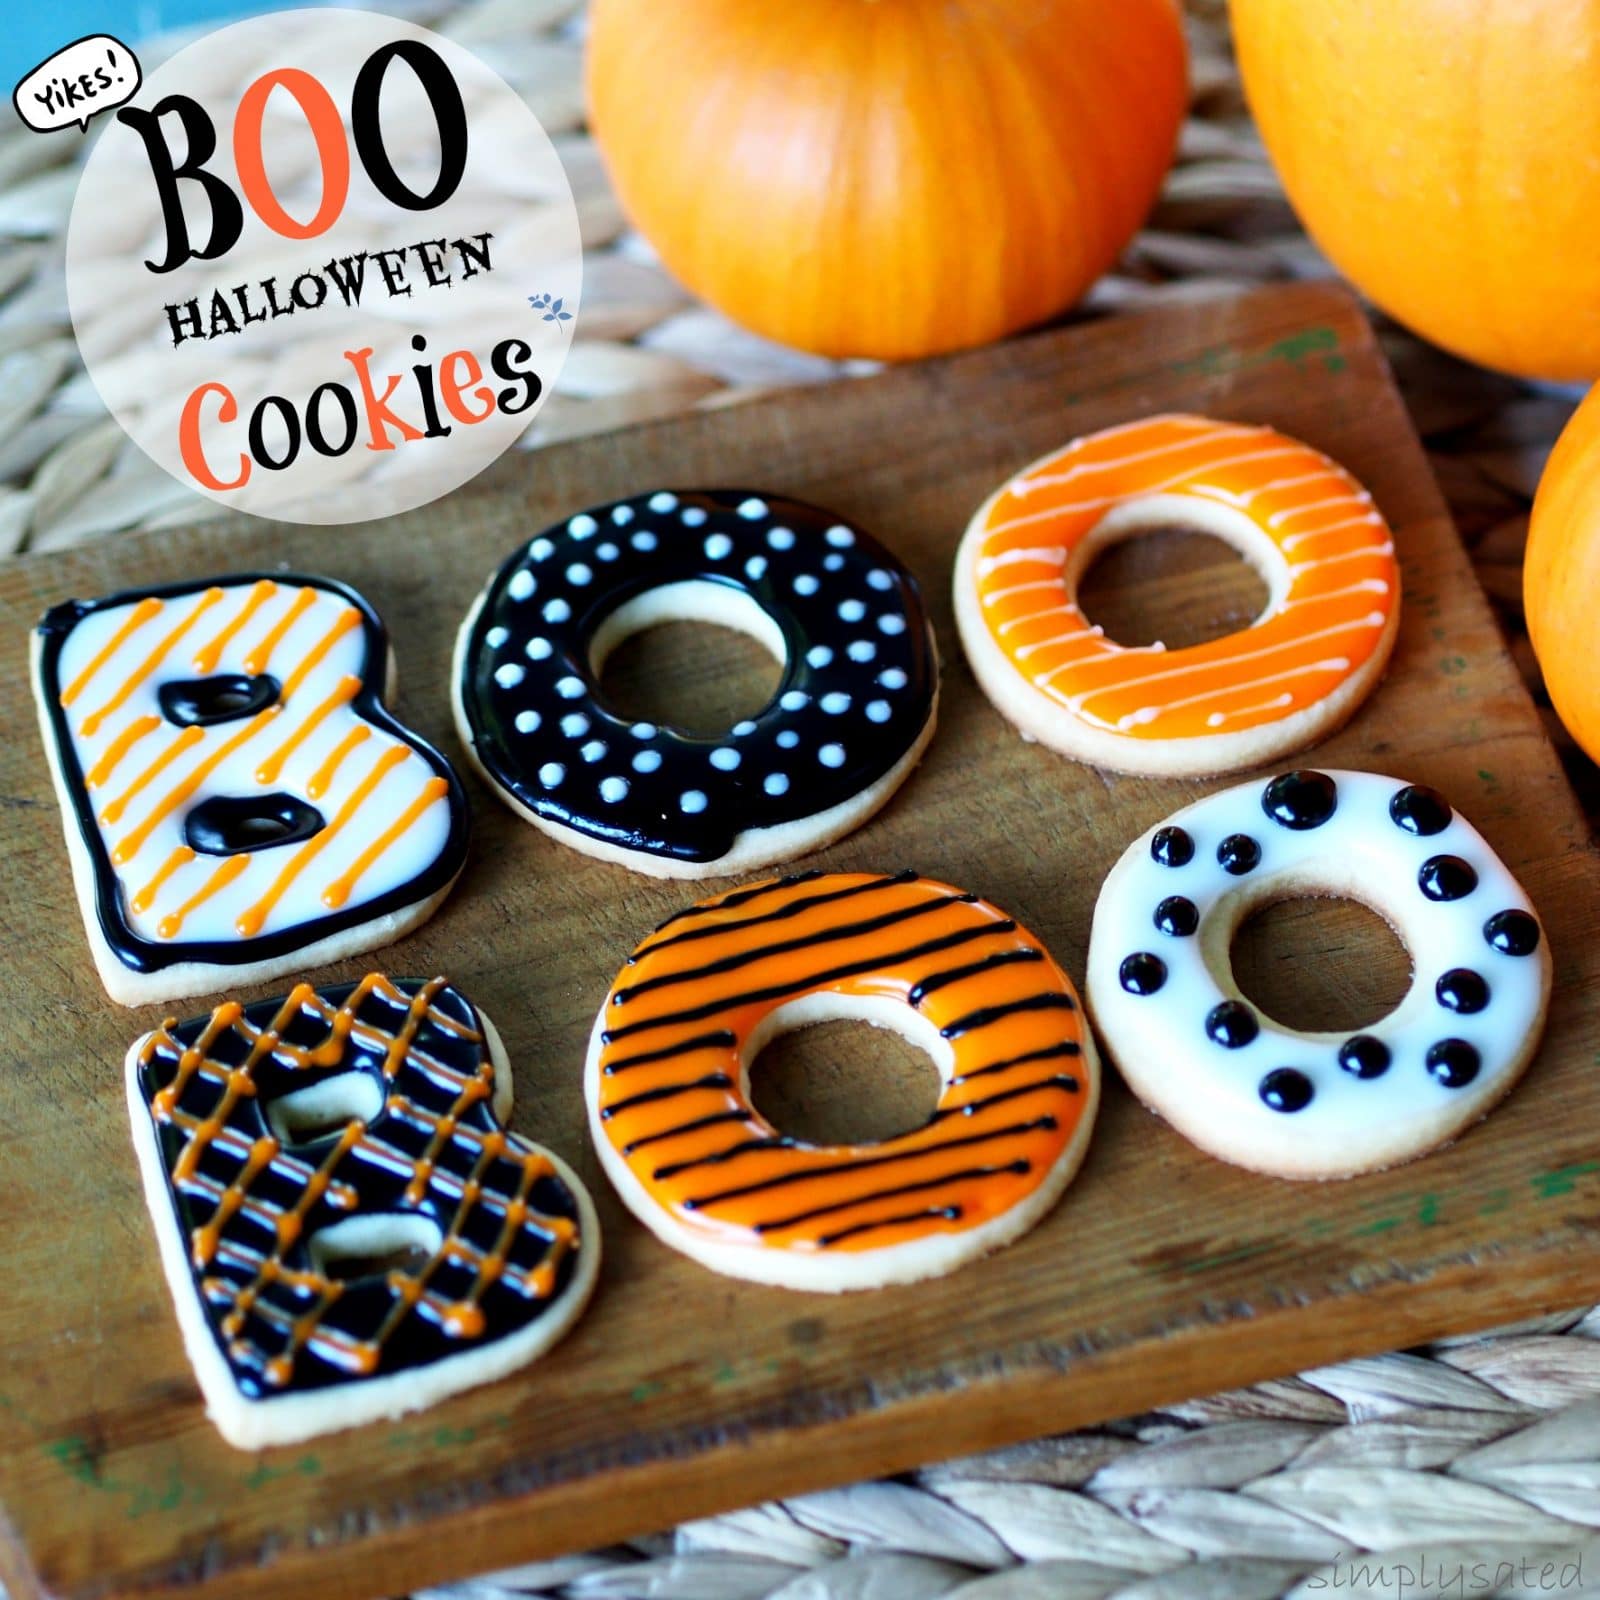 BOO Halloween Cookies are an easy and fun treat for your Halloween party. simplysated